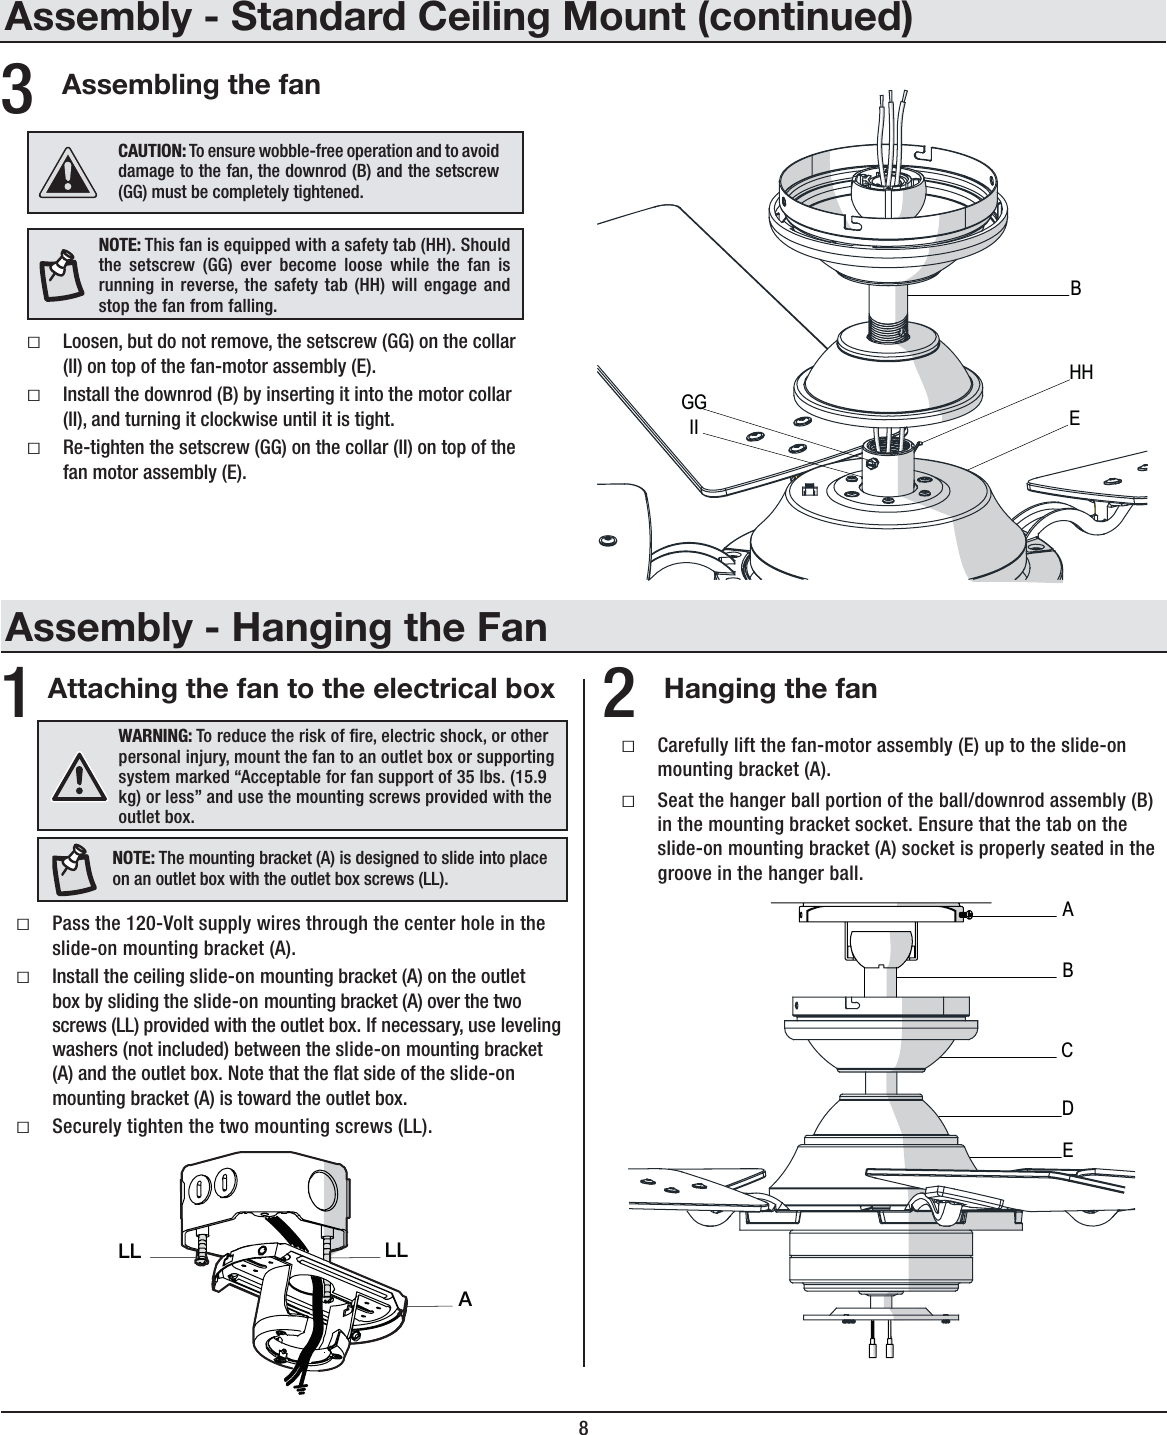 8Assembling the fanƑLoosen, but do not remove, the setscrew (GG) on the collar (II) on top of the fan-motor assembly (E).ƑInstall the downrod (B) by inserting it into the motor collar (II), and turning it clockwise until it is tight.ƑRe-tighten the setscrew (GG) on the collar (II) on top of the fan motor assembly (E).356;,!This fan is equipped with a safety tab (HH). Should the setscrew (GG) ever become loose while the fan is running in reverse, the safety tab (HH) will engage and stop the fan from falling.*(&lt;;065! To ensure wobble-free operation and to avoid damage to the fan, the downrod (B) and the setscrew (GG) must be completely tightened.Assembly - Hanging the FanAttaching the fan to the electrical box Hanging the fanƑPass the 120-Volt supply wires through the center hole in the slide-on mounting bracket (A).ƑInstall the ceiling slide-on mounting bracket (A) on the outlet box by sliding the slide-on mounting bracket (A) over the two screws (LL) provided with the outlet box. If necessary, use leveling washers (not included) between the slide-on mounting bracket (A) and the outlet box. Note that the at side of the slide-on mounting bracket (A) is toward the outlet box.ƑSecurely tighten the two mounting screws (LL).ƑCarefully lift the fan-motor assembly (E) up to the slide-on mounting bracket (A).ƑSeat the hanger ball portion of the ball/downrod assembly (B) in the mounting bracket socket. Ensure that the tab on the slide-on mounting bracket (A) socket is properly seated in the groove in the hanger ball.12&gt;(9505.! To reduce the risk of re, electric shock, or other personal injury, mount the fan to an outlet box or supporting system marked “Acceptable for fan support of 35 lbs. (15.9 kg) or less” and use the mounting screws provided with the outlet box.ALLLL56;,! The mounting bracket (A) is designed to slide into place on an outlet box with the outlet box screws (LL).ABECDEBHHGGIIAssembly - Standard Ceiling Mount (continued)